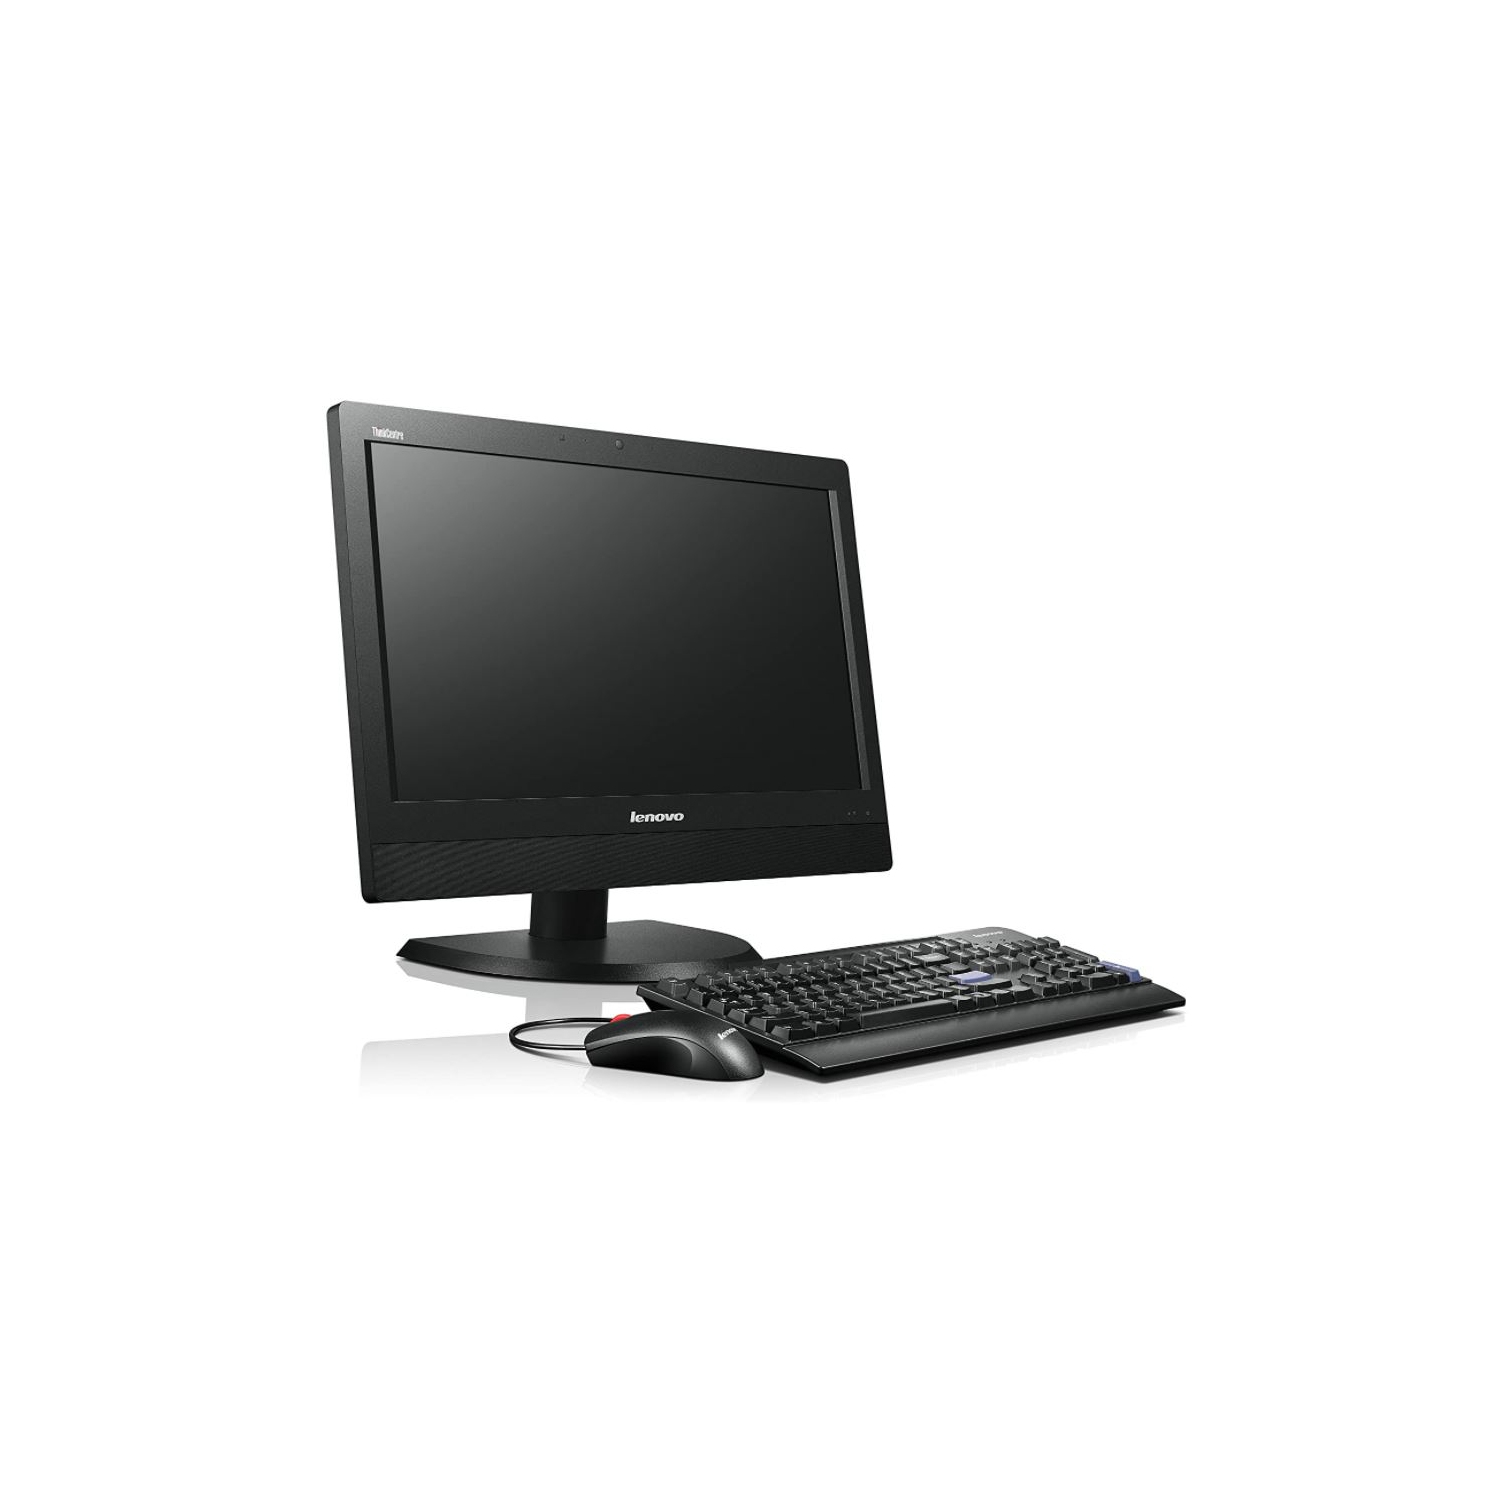 Refurbished (Good) - Lenovo ThinkCentre M93z AIO 23" Display, i5-4570s, 2.9Ghz, 8GB RAM, 500GB HDD, Webcam, Windows 10 Pro, Keyboard & Mouse not included